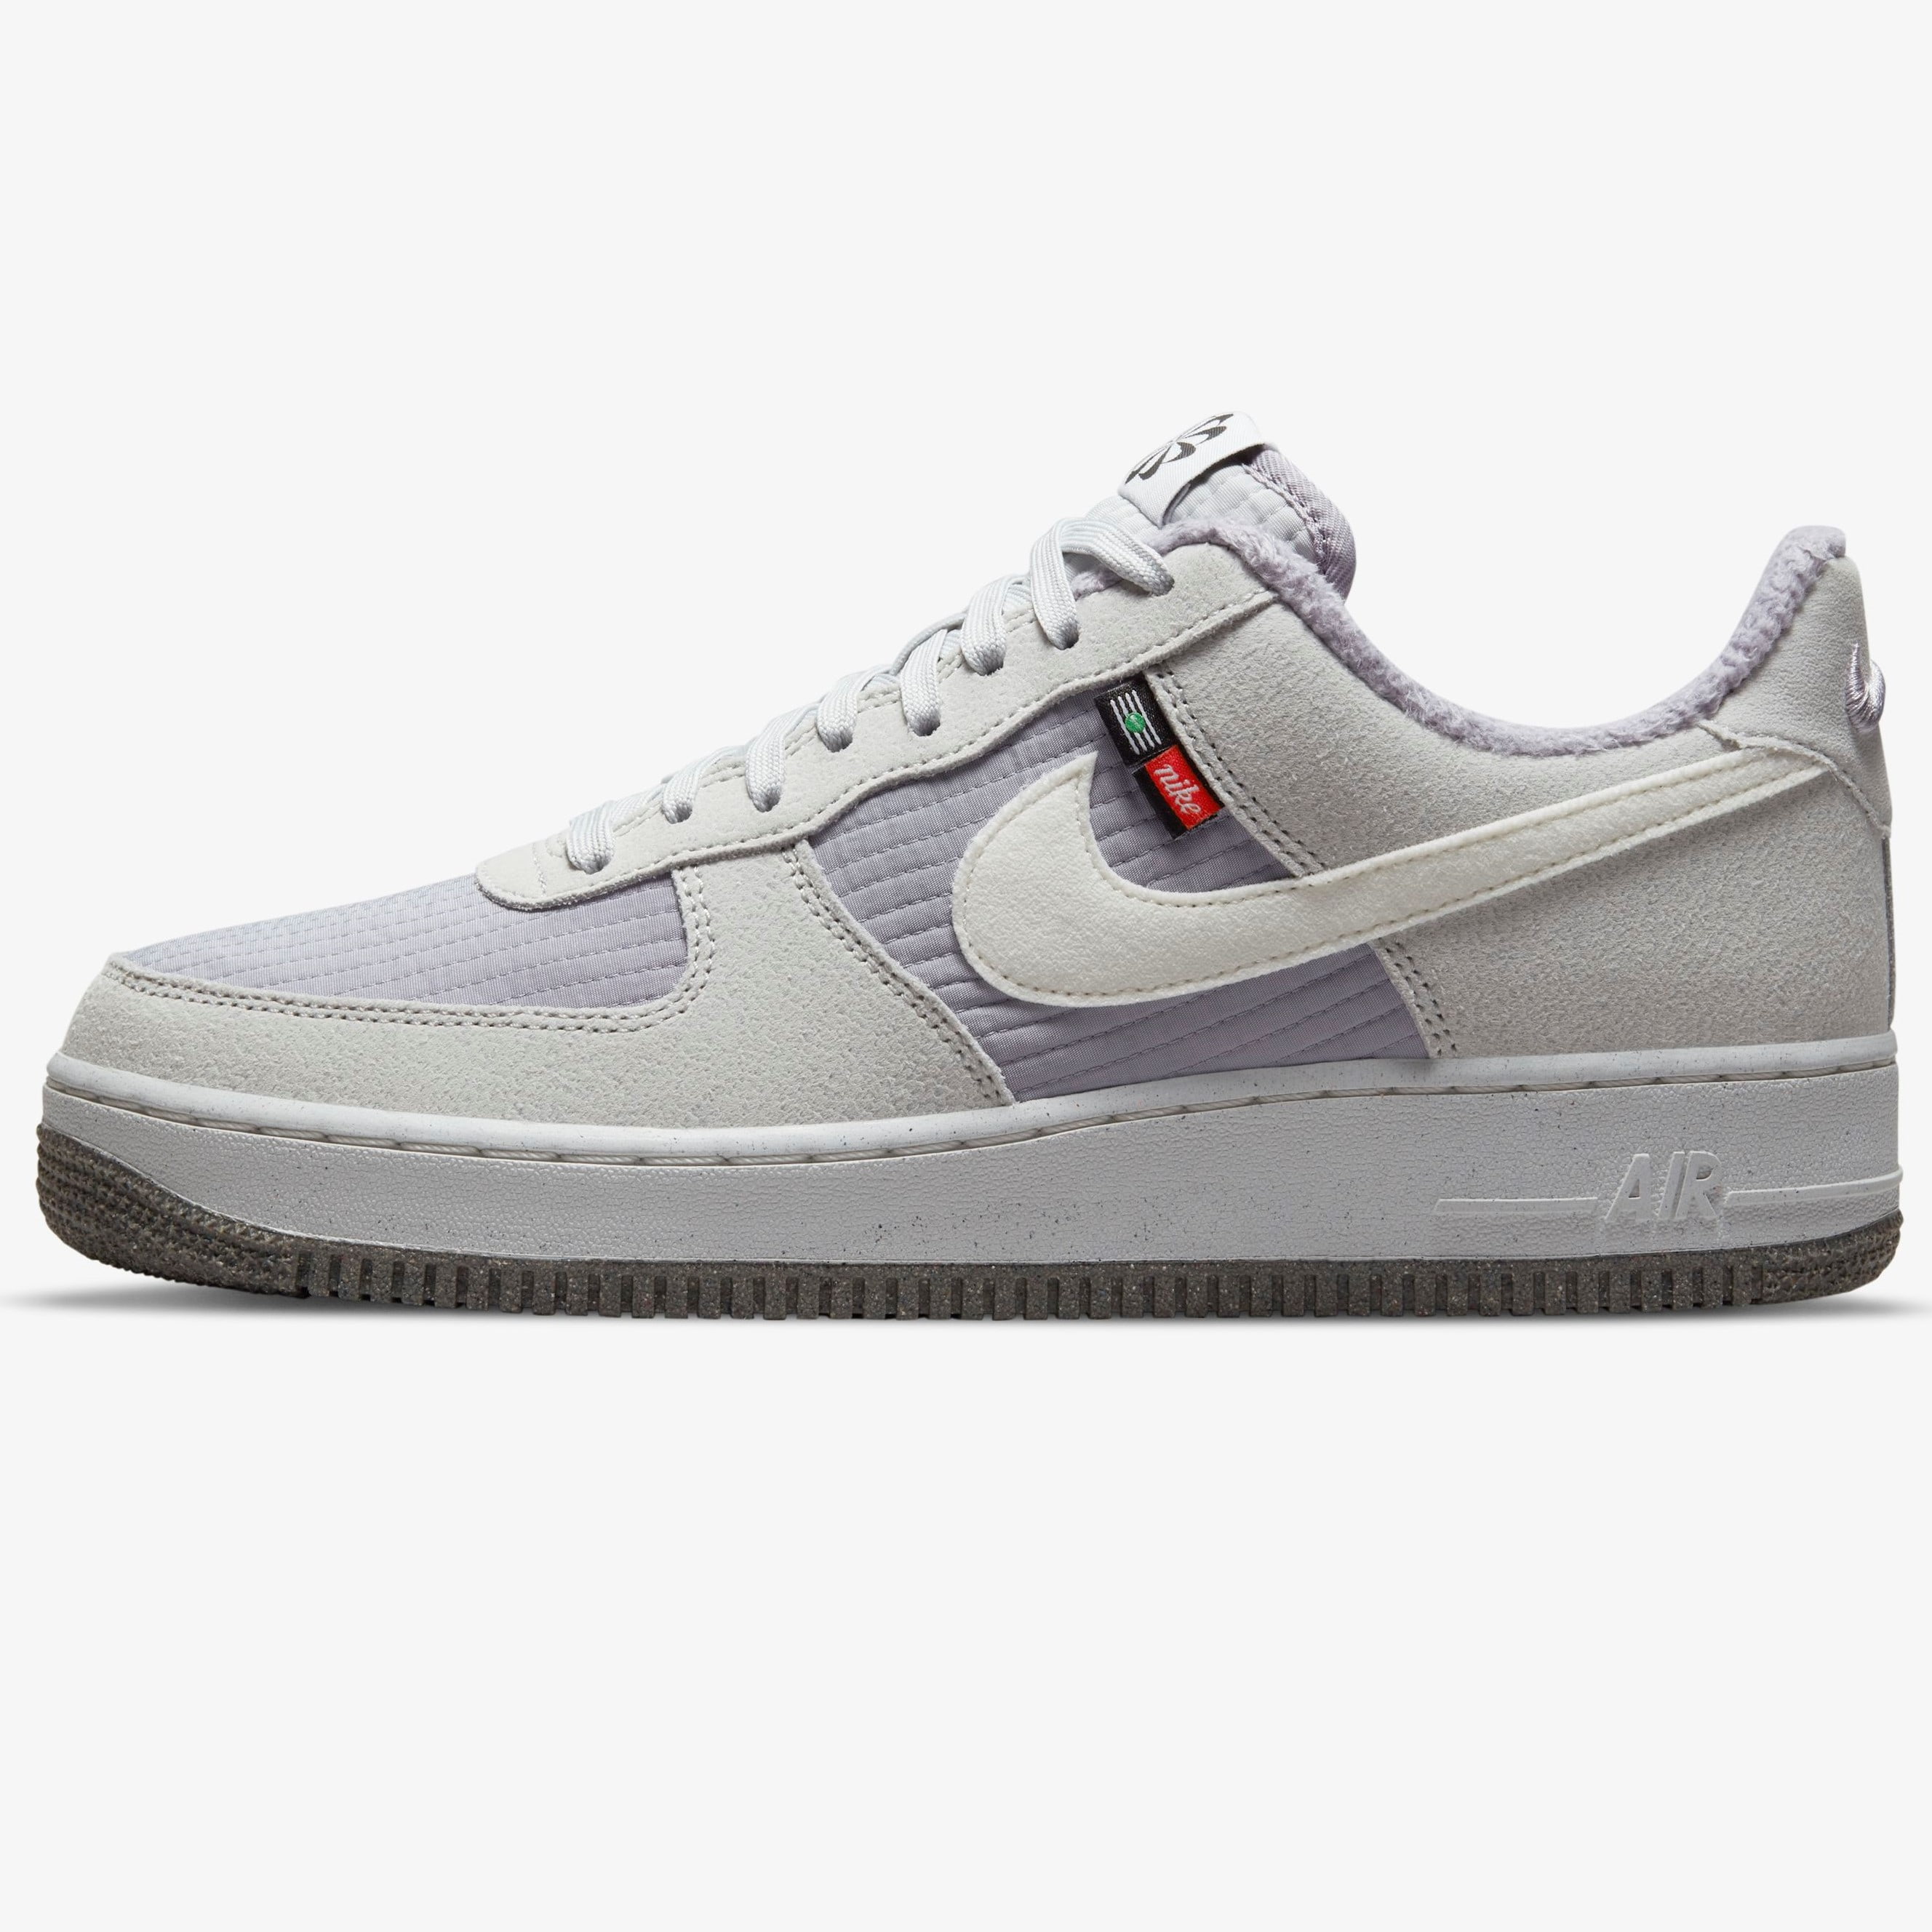 GIÀY SNEAKER NIKE AIR FORCE 1 LOW TOASTY PURPLE 7